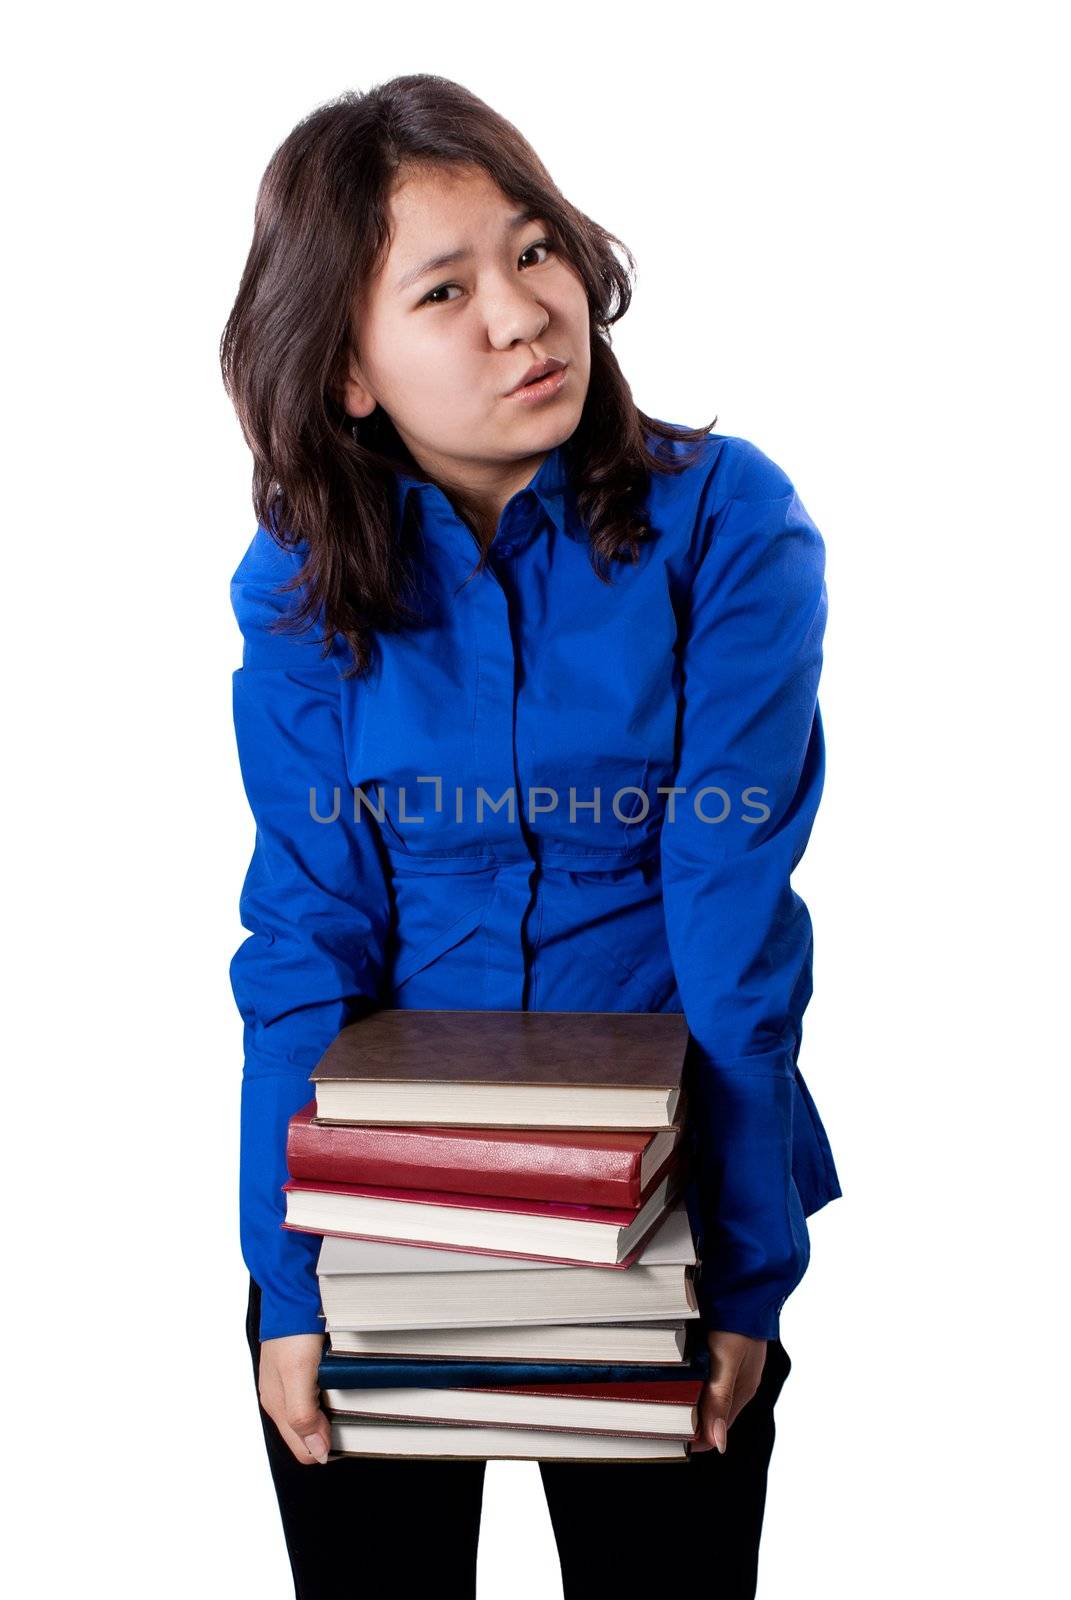 Asian girl holding large stack of books, isolated on white